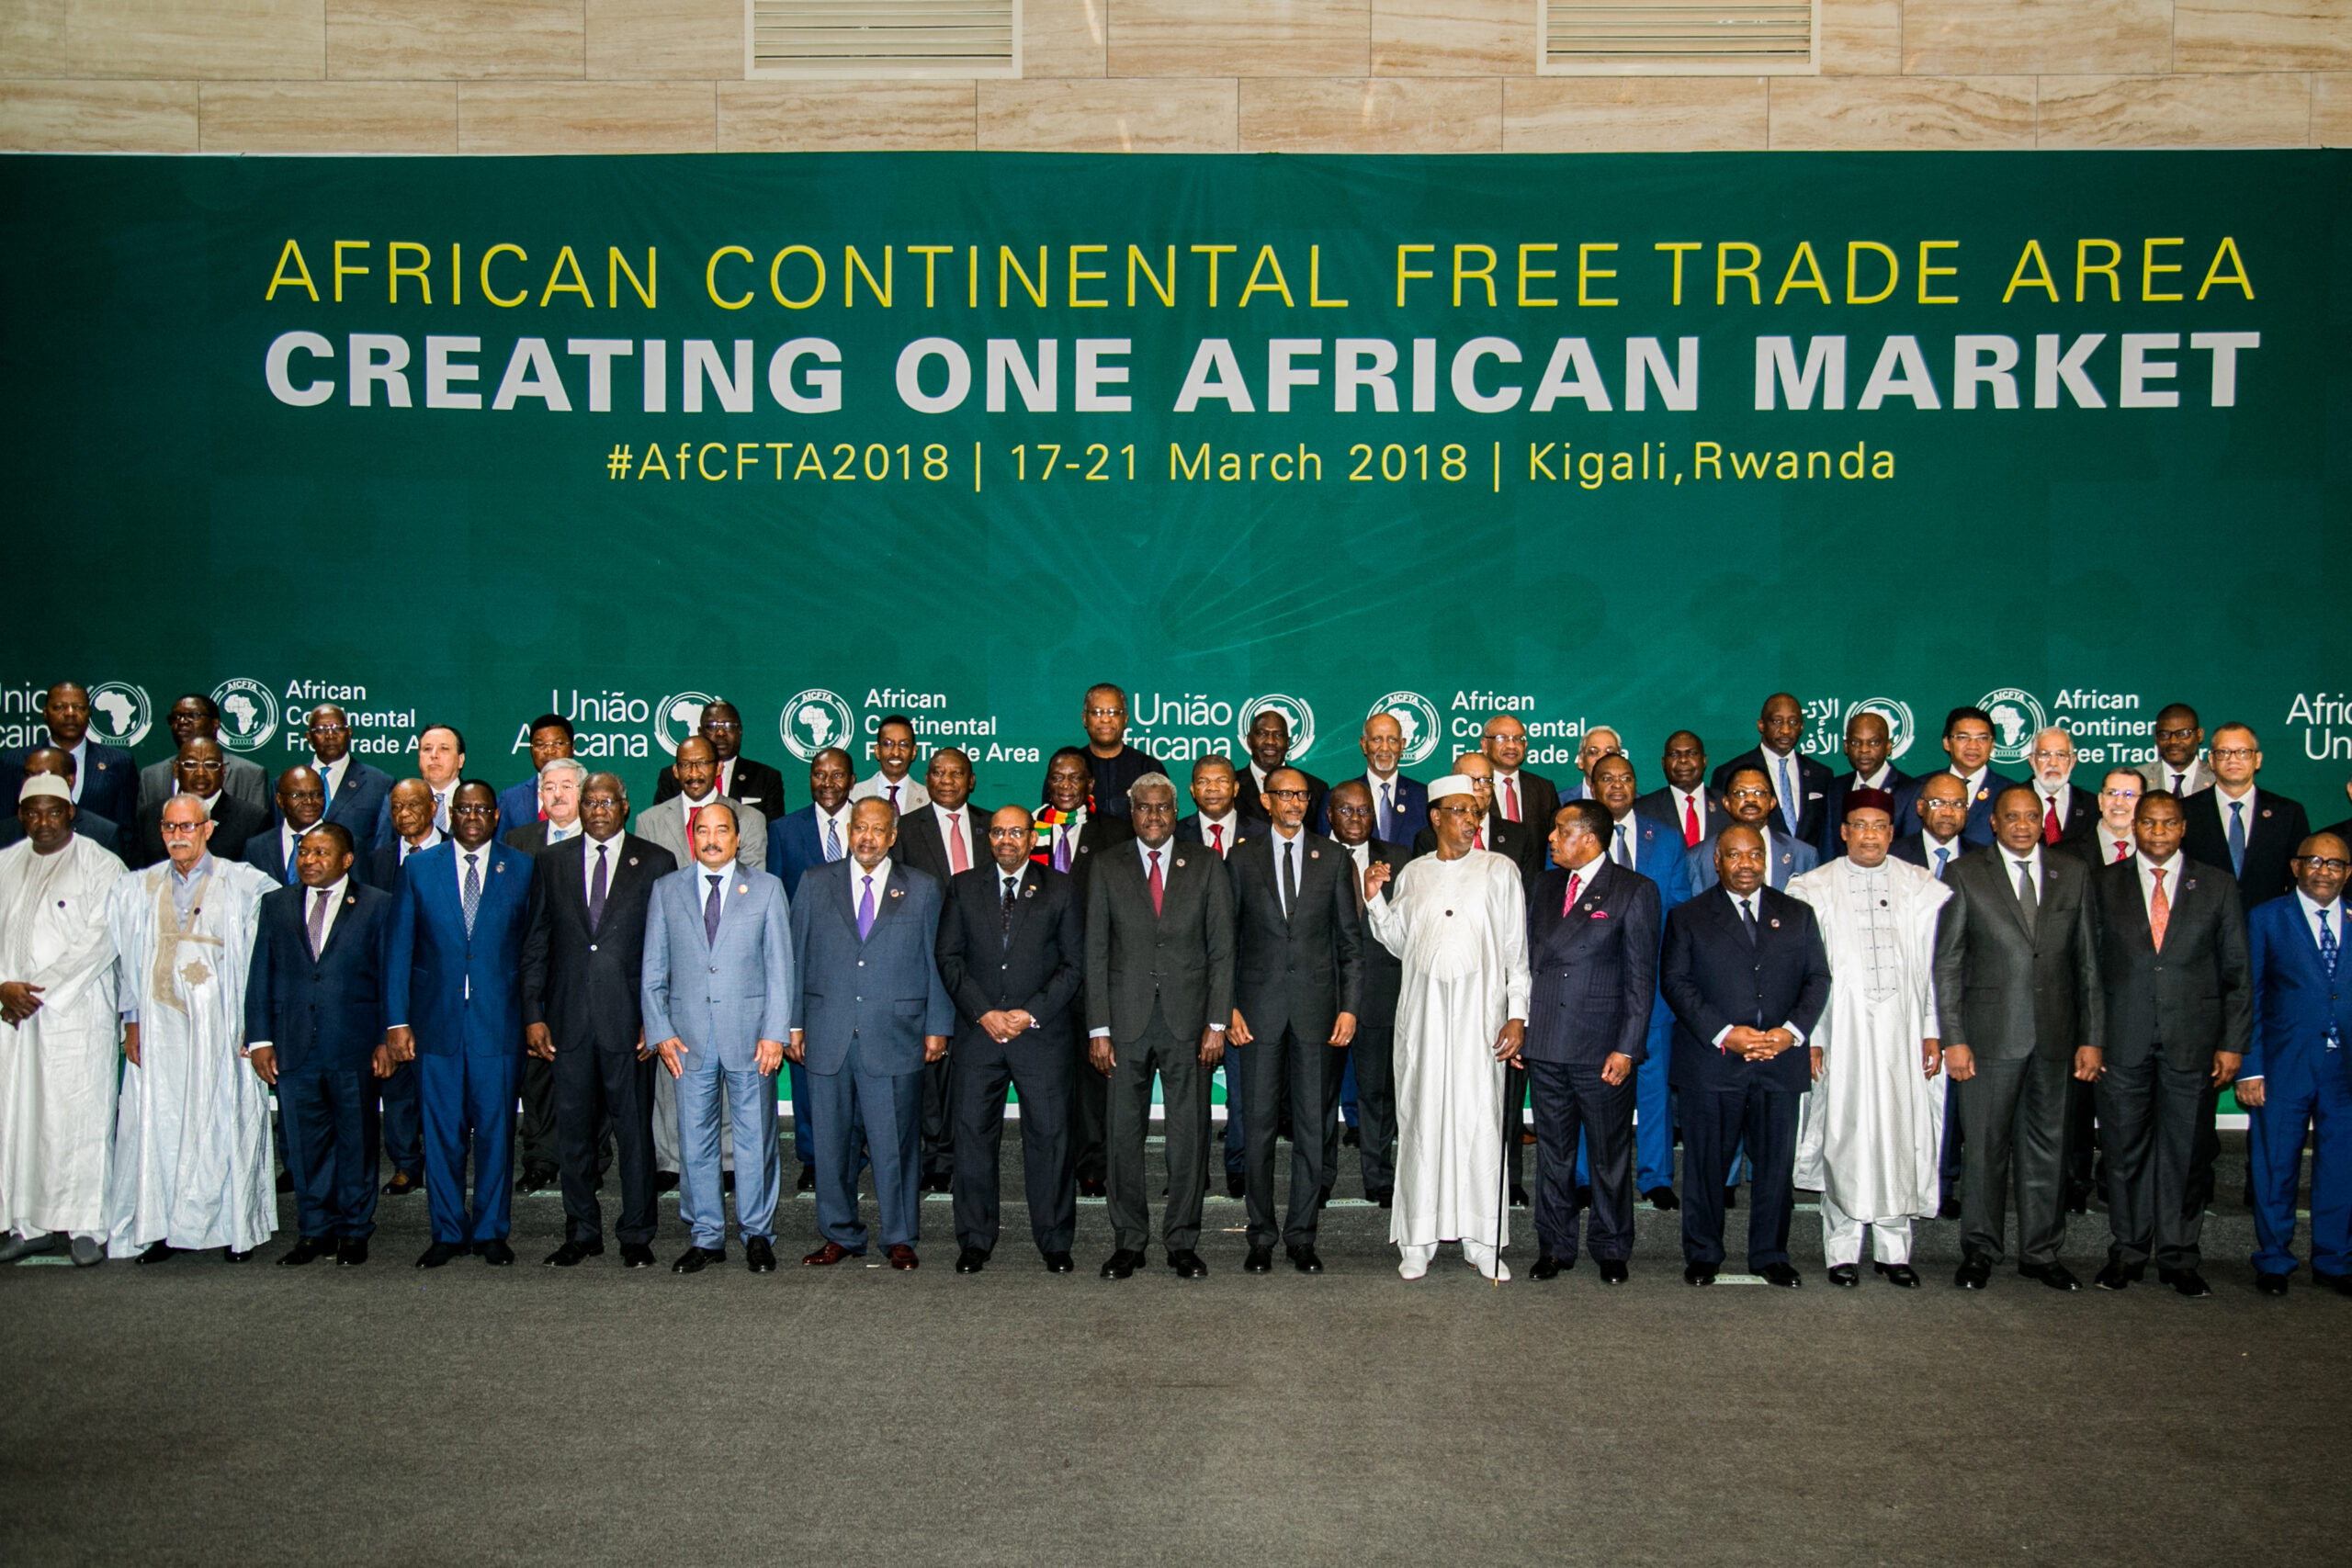 High expectations as African ministers provide AfCFTA with impetus